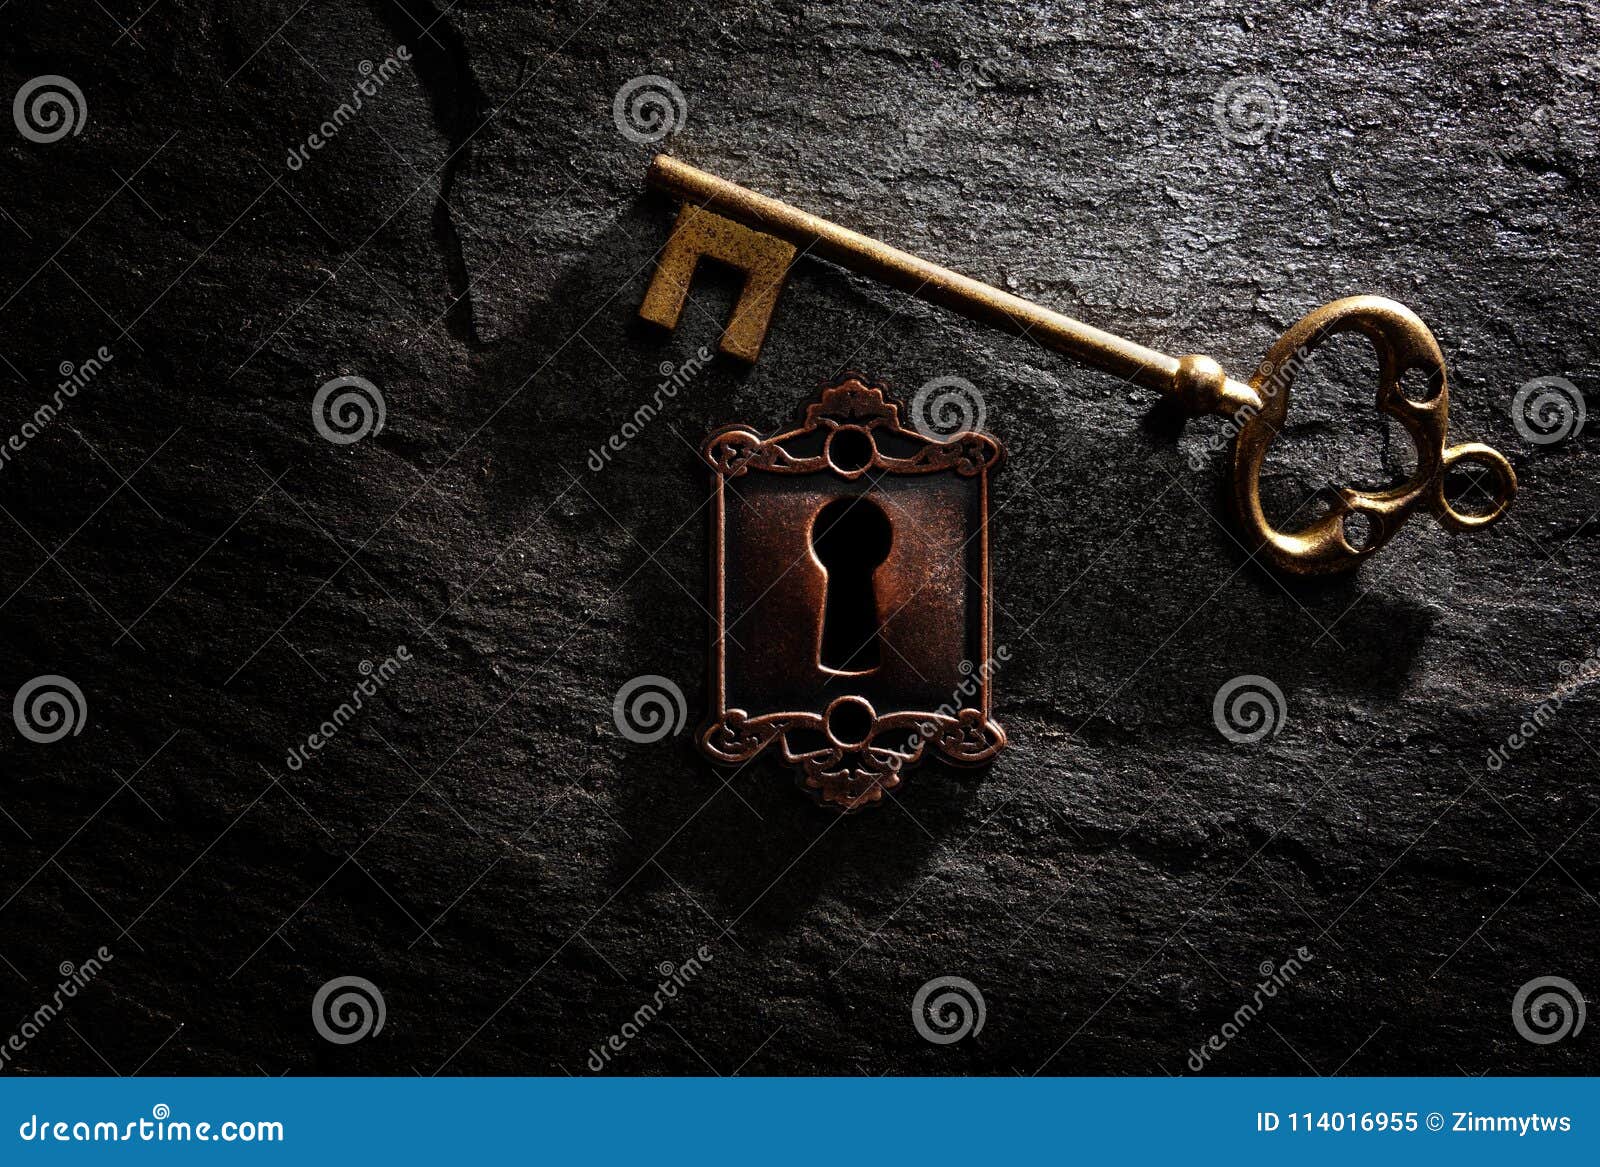 Old Vintage Key In A Glass Cupboard Lock. Wineglass Inside. Close-up Stock  Photo, Picture and Royalty Free Image. Image 153912961.